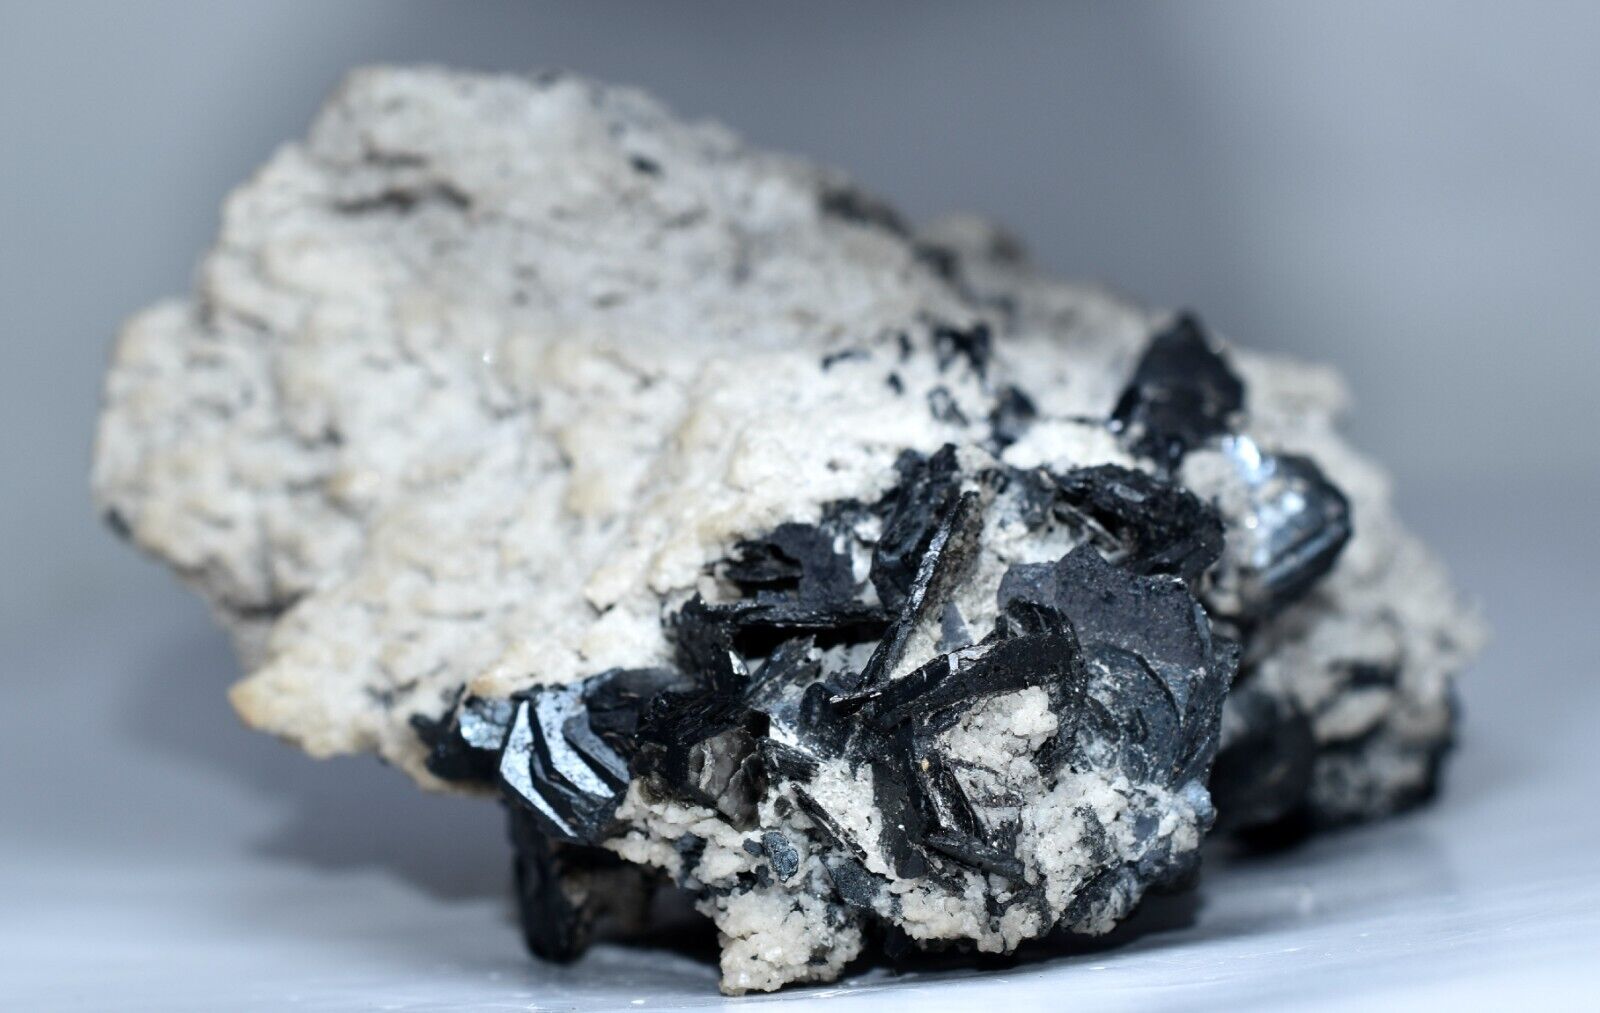 288 GM Extremely Rare Natural Black Hematite Crystals On Unusual White Minerals